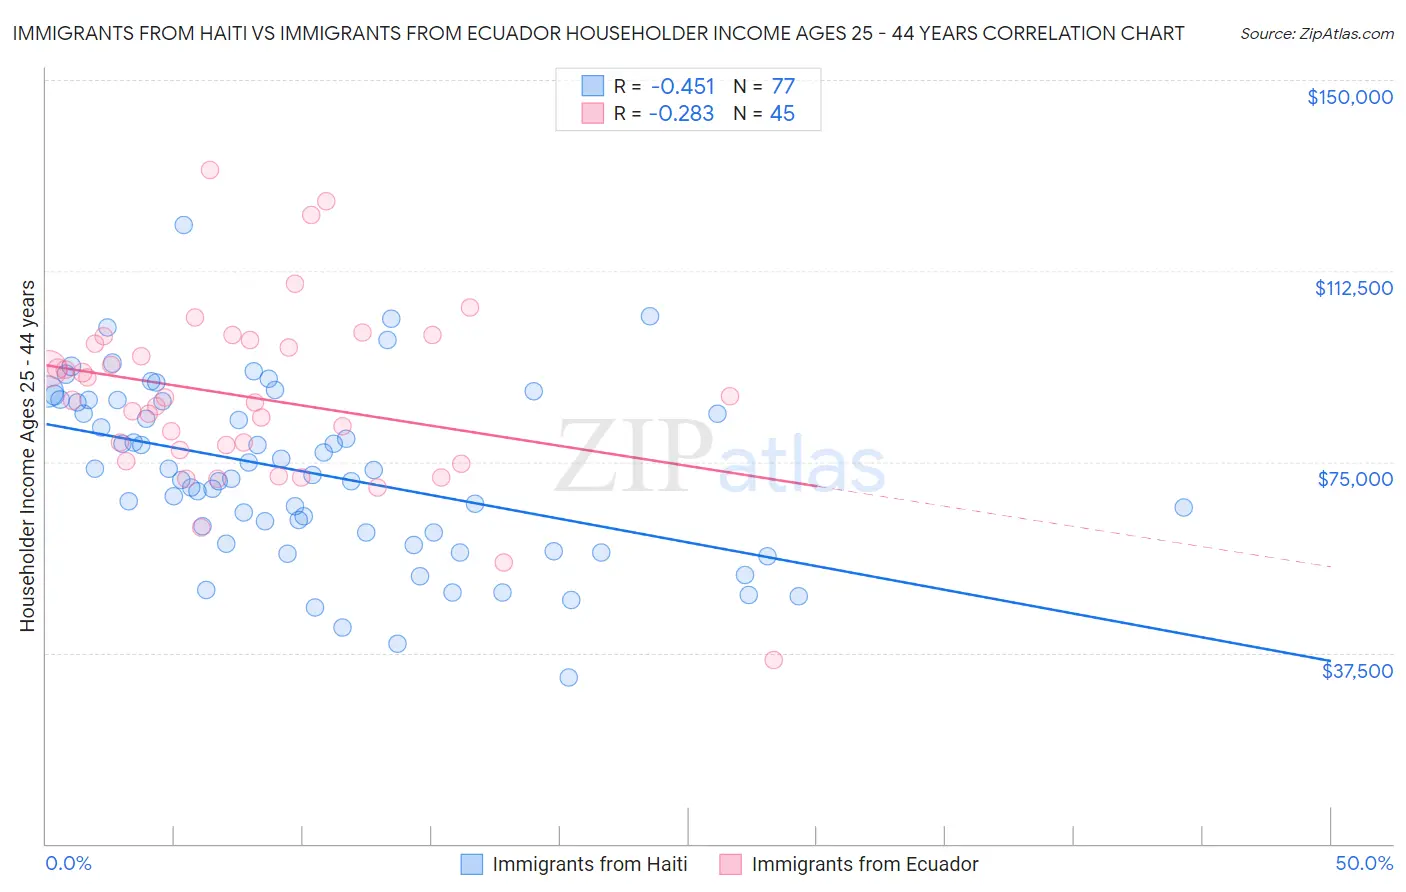 Immigrants from Haiti vs Immigrants from Ecuador Householder Income Ages 25 - 44 years